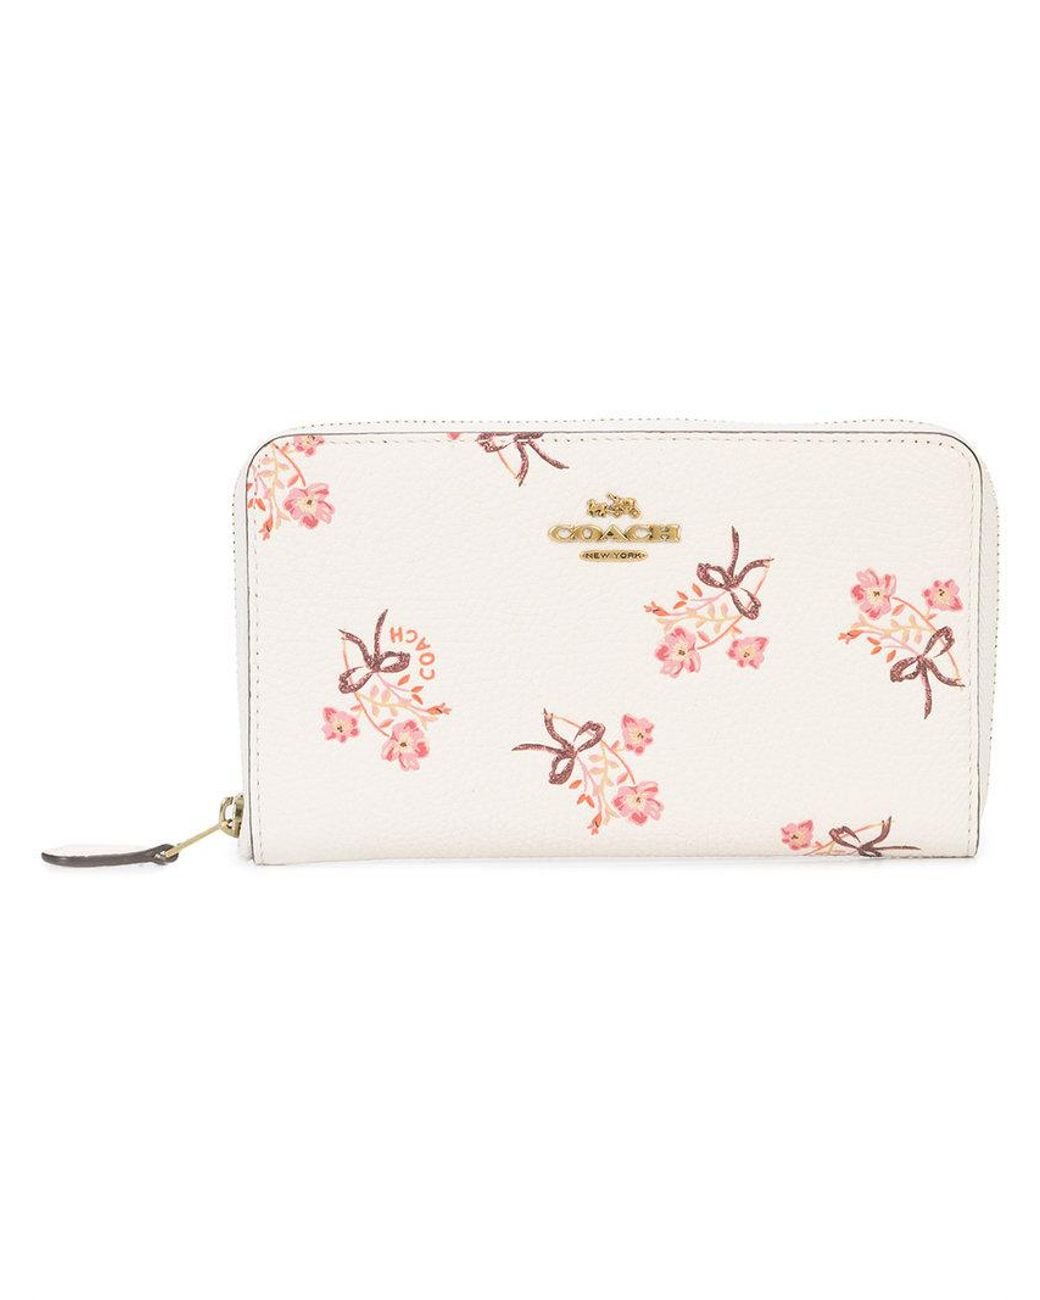 COACH Floral Bow Medium Wallet in White | Lyst